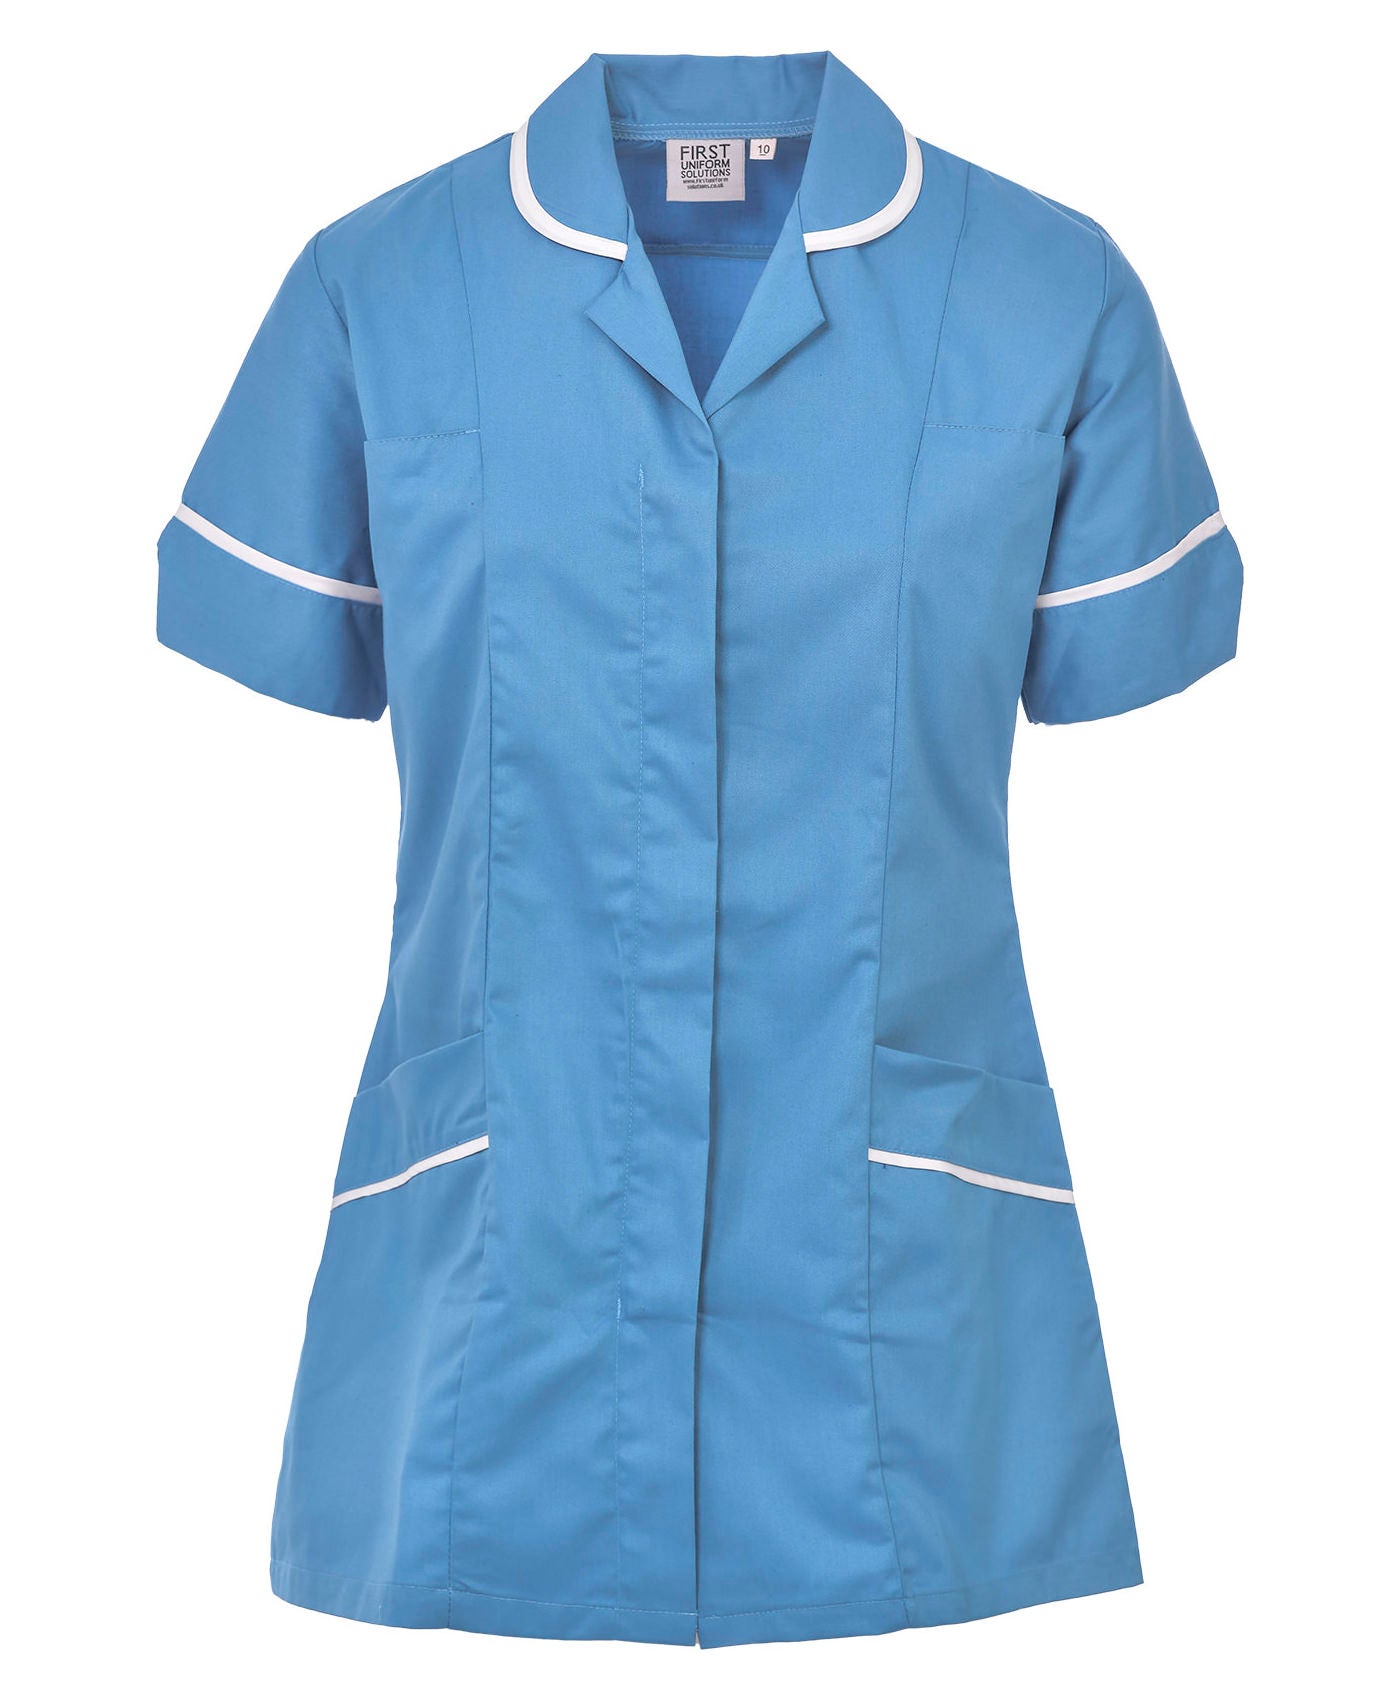 Women's Poly Cotton Tunic Ideal for Nurses and Care Homes | Size 8 to 26 | FNLT01 Hospital Blue